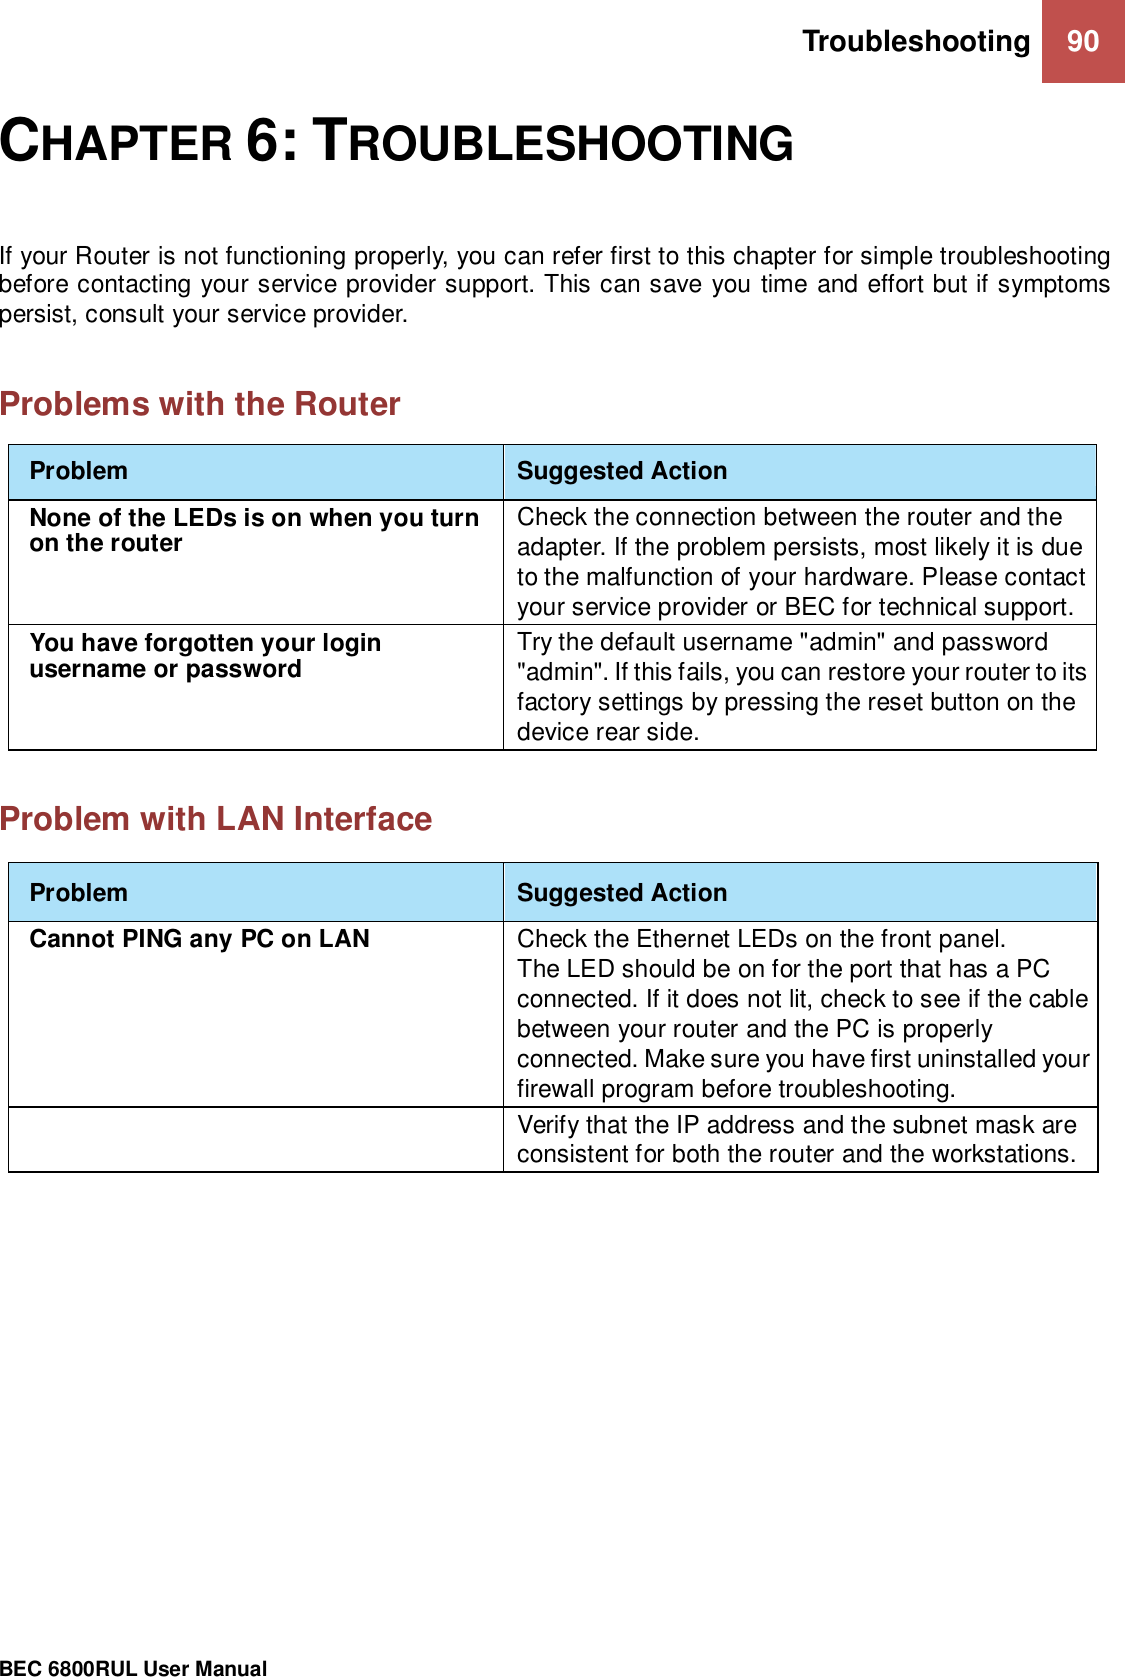 Troubleshooting 90                                                 BEC 6800RUL User Manual  CHAPTER 6: TROUBLESHOOTING If your Router is not functioning properly, you can refer first to this chapter for simple troubleshooting before contacting your service provider support. This can save you time and effort but if symptoms persist, consult your service provider.  Problems with the Router  Problem  Suggested Action None of the LEDs is on when you turn on the router  Check the connection between the router and the adapter. If the problem persists, most likely it is due to the malfunction of your hardware. Please contact your service provider or BEC for technical support. You have forgotten your login username or password Try the default username &quot;admin&quot; and password &quot;admin&quot;. If this fails, you can restore your router to its factory settings by pressing the reset button on the device rear side.   Problem with LAN Interface   Problem  Suggested Action Cannot PING any PC on LAN Check the Ethernet LEDs on the front panel. The LED should be on for the port that has a PC connected. If it does not lit, check to see if the cable between your router and the PC is properly connected. Make sure you have first uninstalled your firewall program before troubleshooting.  Verify that the IP address and the subnet mask are consistent for both the router and the workstations.    